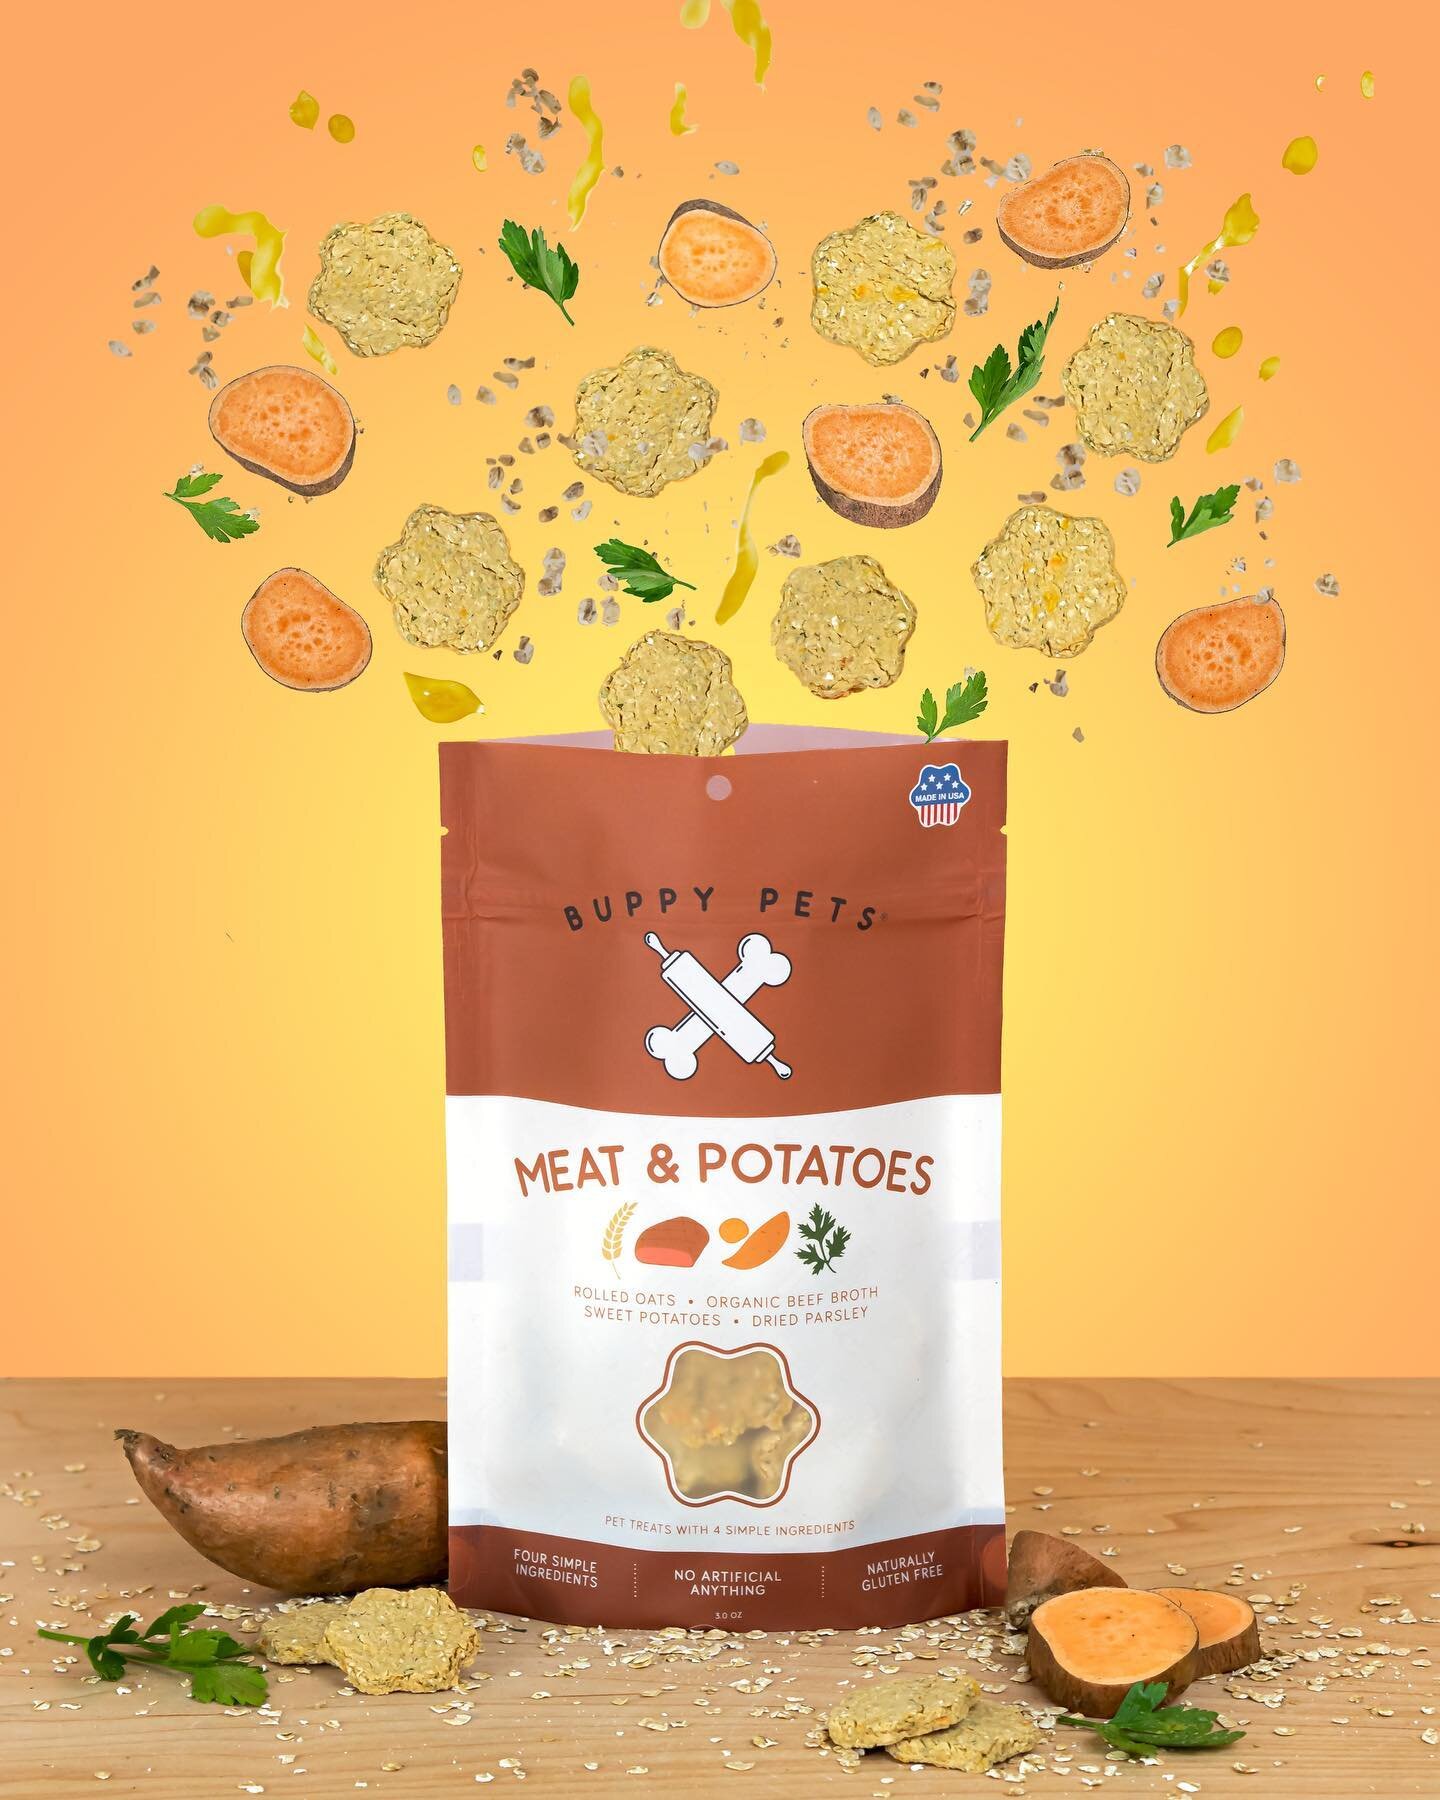 Our new Meat and Potatoes have earned their spot as a top seller! Has your pup tried the sweet and savory combo yet?